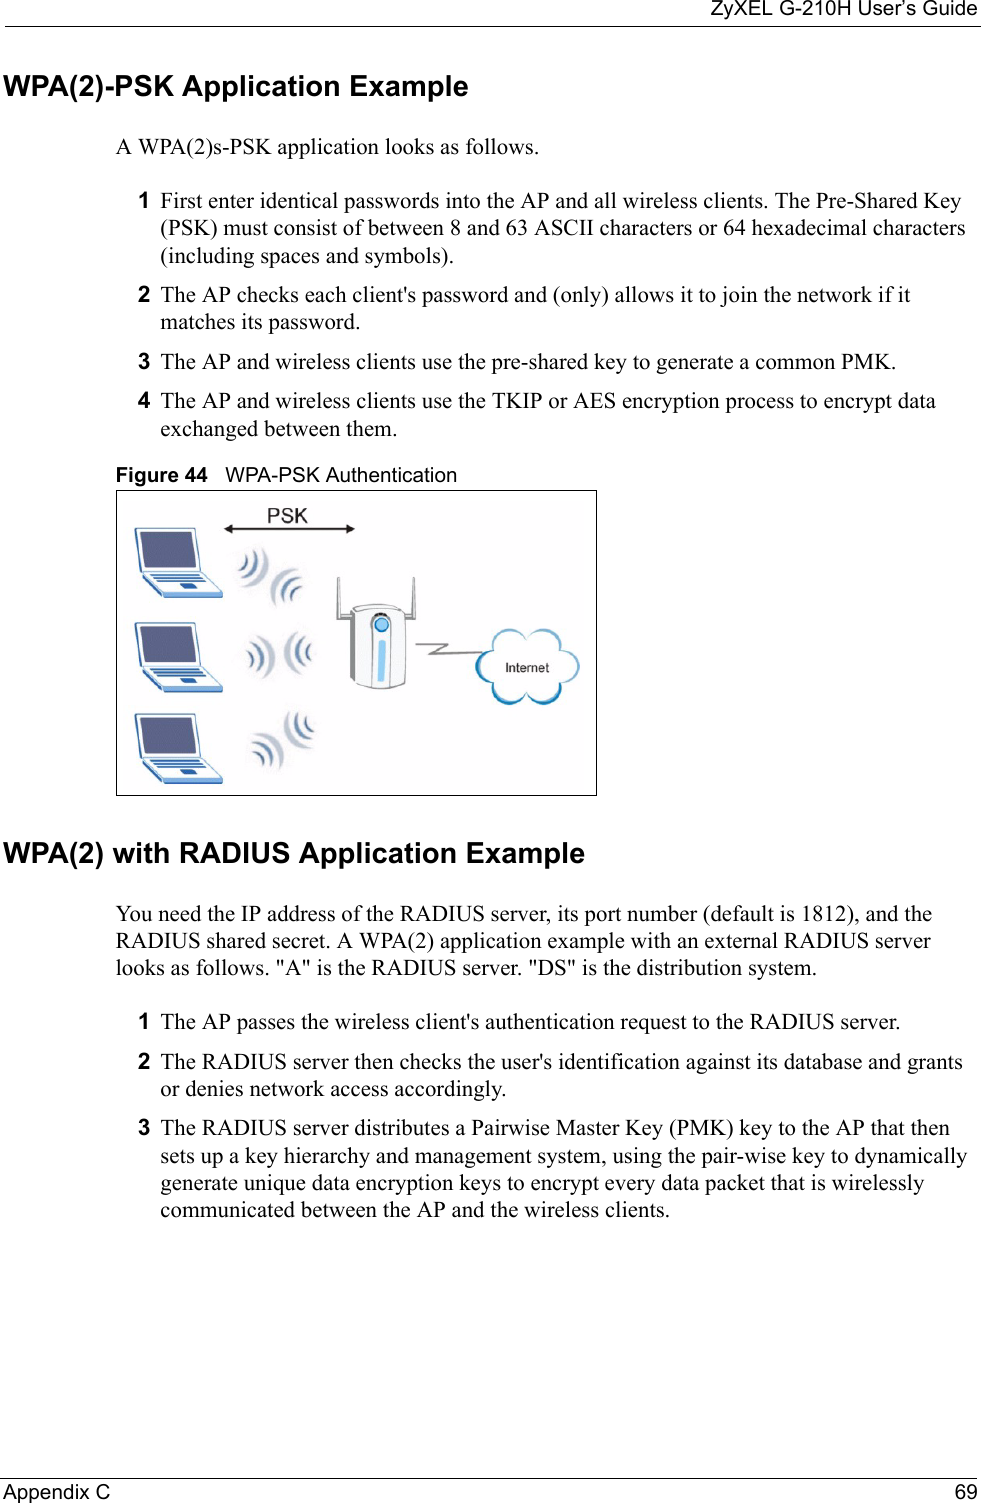 ZyXEL G-210H User’s GuideAppendix C 69WPA(2)-PSK Application ExampleA WPA(2)s-PSK application looks as follows.1First enter identical passwords into the AP and all wireless clients. The Pre-Shared Key (PSK) must consist of between 8 and 63 ASCII characters or 64 hexadecimal characters (including spaces and symbols).2The AP checks each client&apos;s password and (only) allows it to join the network if it matches its password.3The AP and wireless clients use the pre-shared key to generate a common PMK.4The AP and wireless clients use the TKIP or AES encryption process to encrypt data exchanged between them.Figure 44   WPA-PSK AuthenticationWPA(2) with RADIUS Application ExampleYou need the IP address of the RADIUS server, its port number (default is 1812), and the RADIUS shared secret. A WPA(2) application example with an external RADIUS server looks as follows. &quot;A&quot; is the RADIUS server. &quot;DS&quot; is the distribution system.1The AP passes the wireless client&apos;s authentication request to the RADIUS server.2The RADIUS server then checks the user&apos;s identification against its database and grants or denies network access accordingly.3The RADIUS server distributes a Pairwise Master Key (PMK) key to the AP that then sets up a key hierarchy and management system, using the pair-wise key to dynamically generate unique data encryption keys to encrypt every data packet that is wirelessly communicated between the AP and the wireless clients.